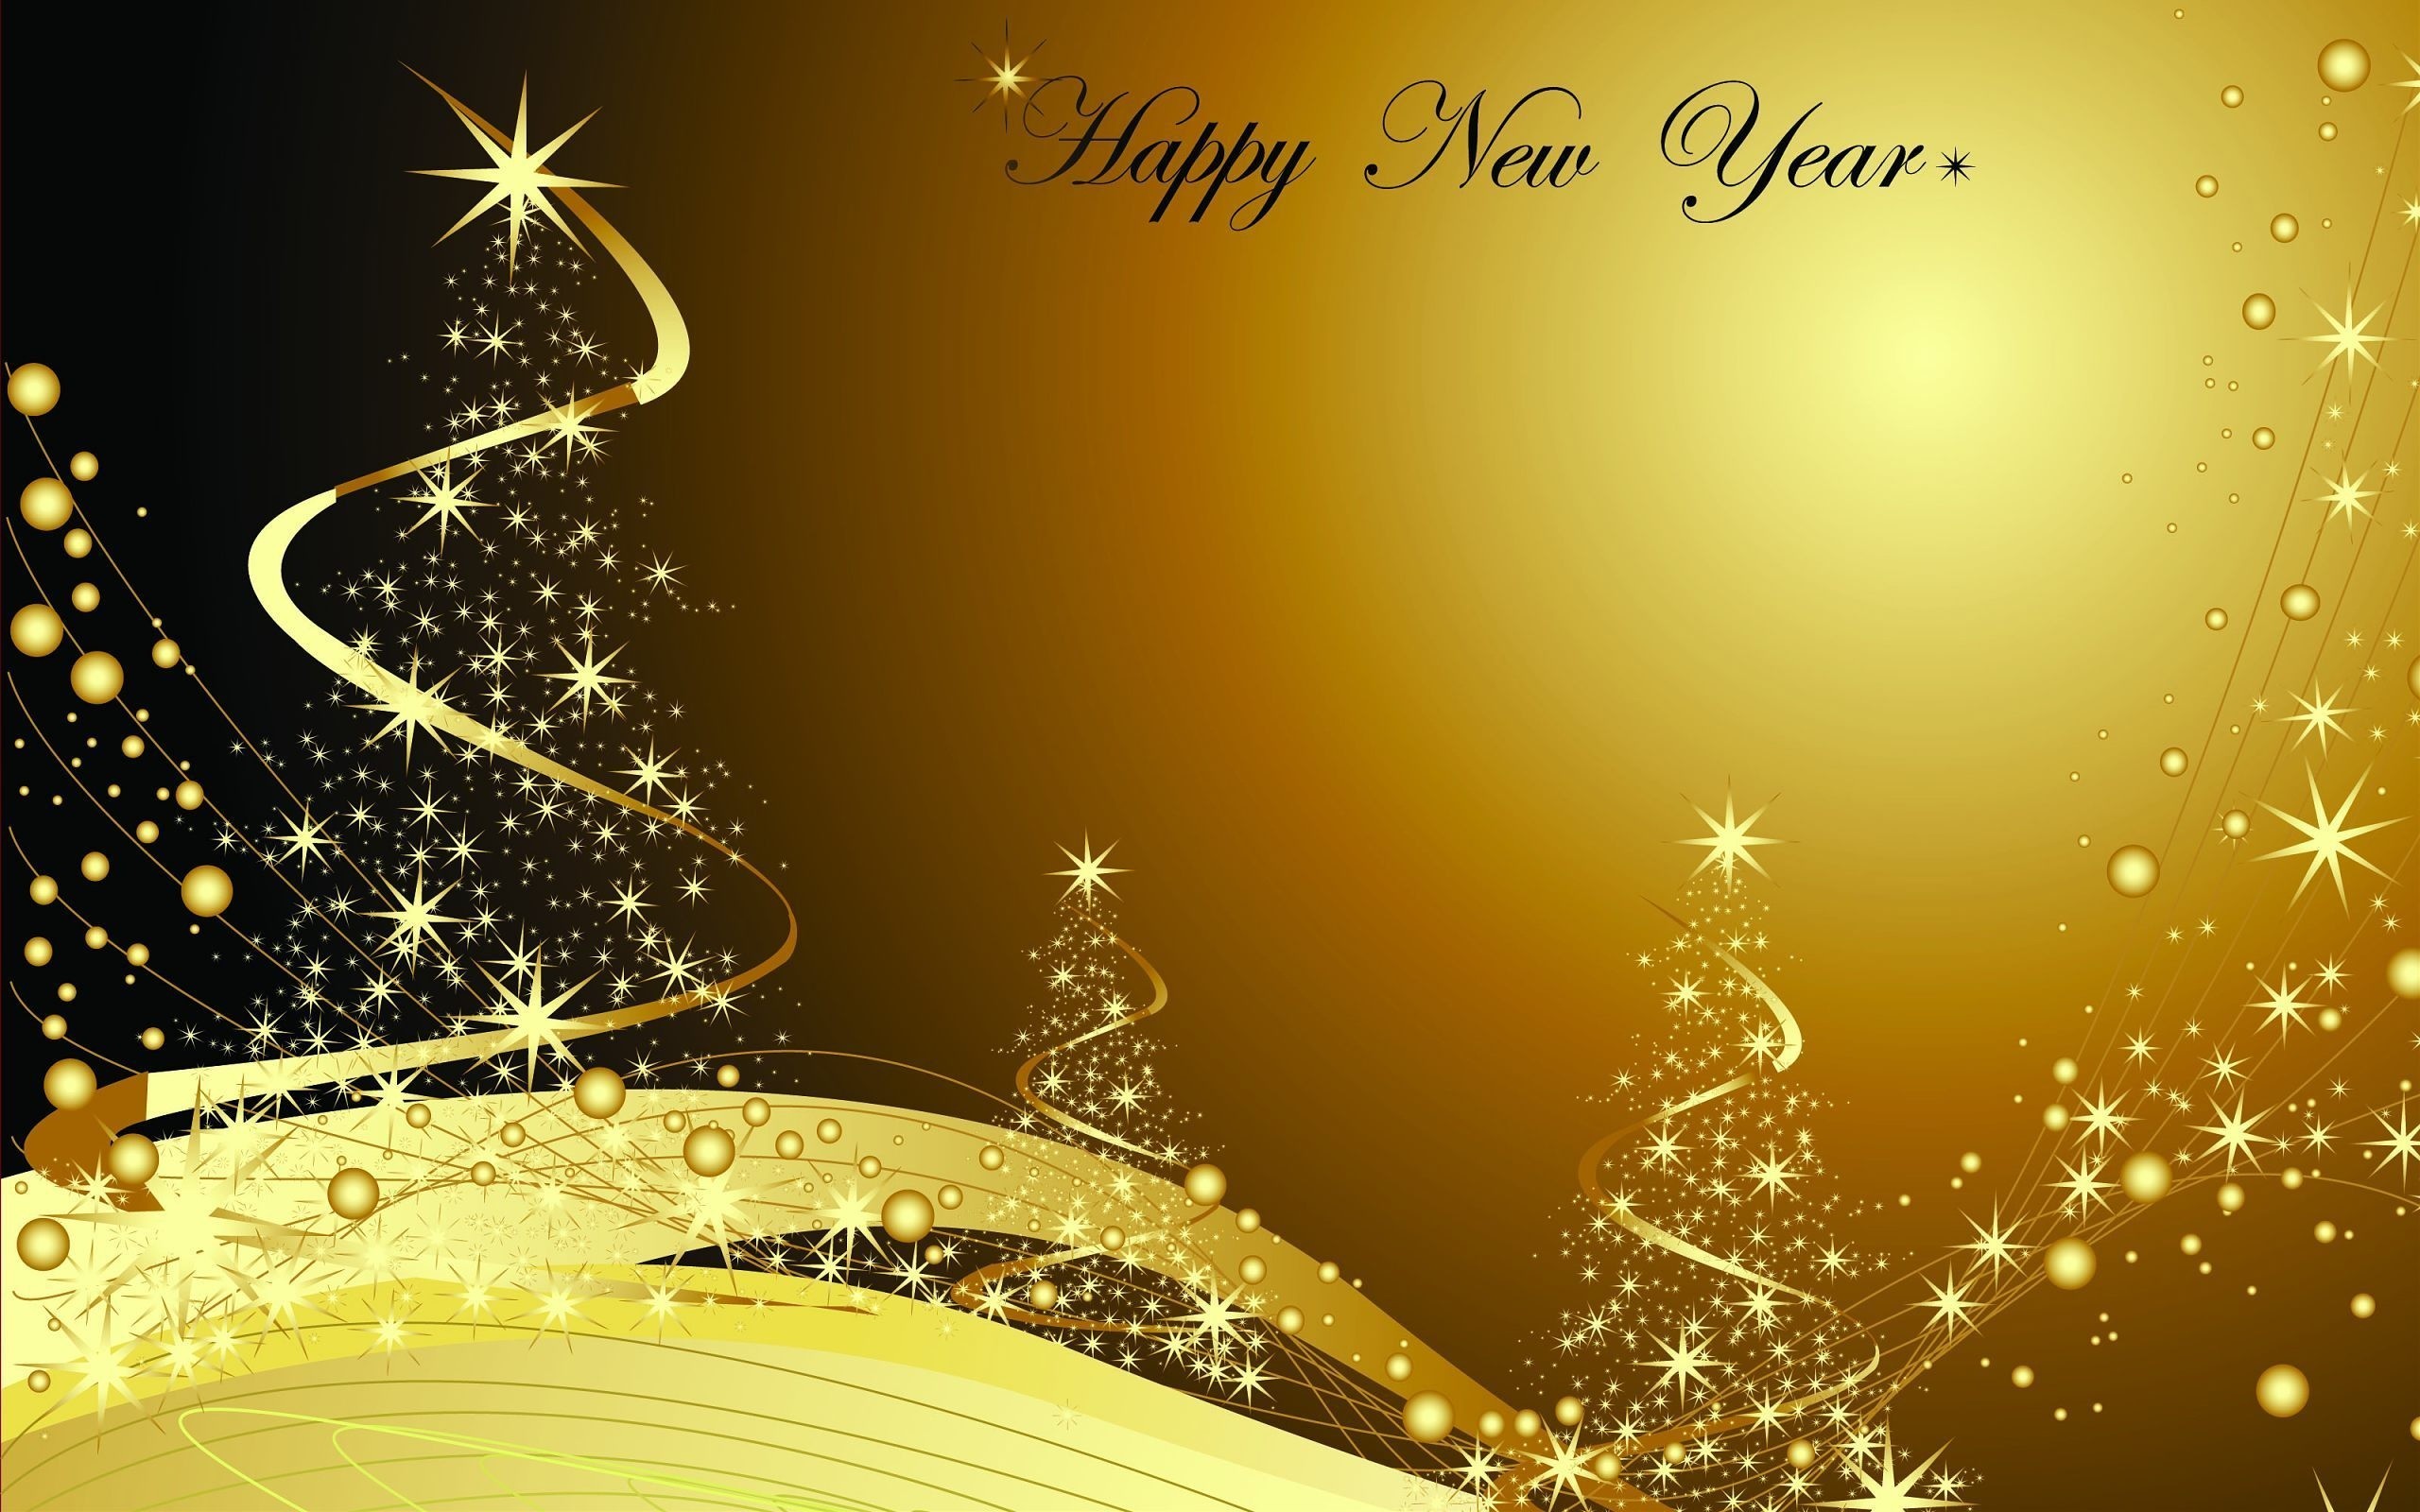 [Latest] Happy New Year 2018 Wallpapers s in HD Merry Christmas